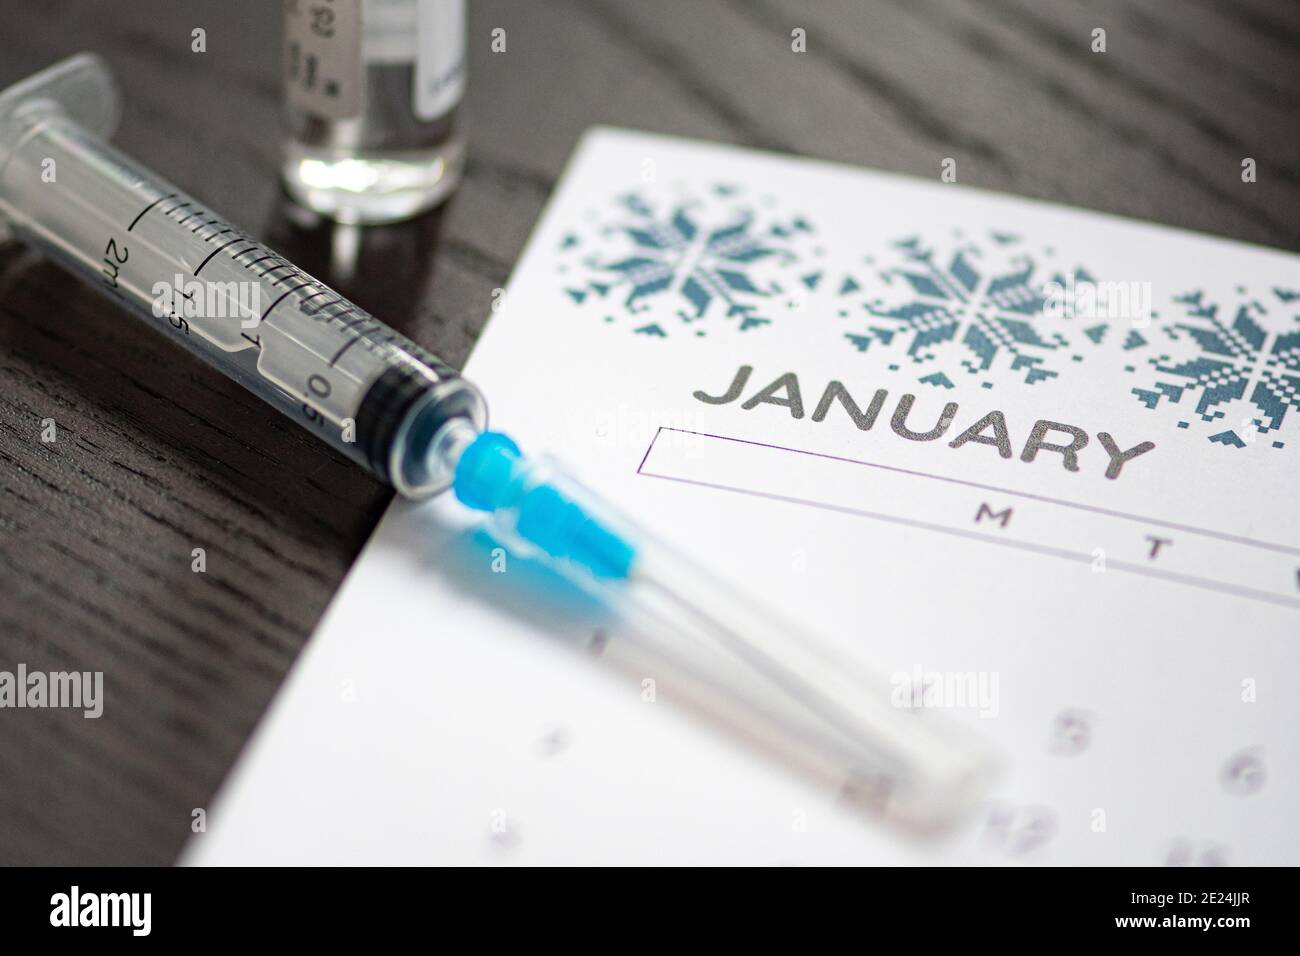 Syringe, vial and calendar with month of January on a black table ready to be used. Covid or Coronavirus vaccine background Stock Photo